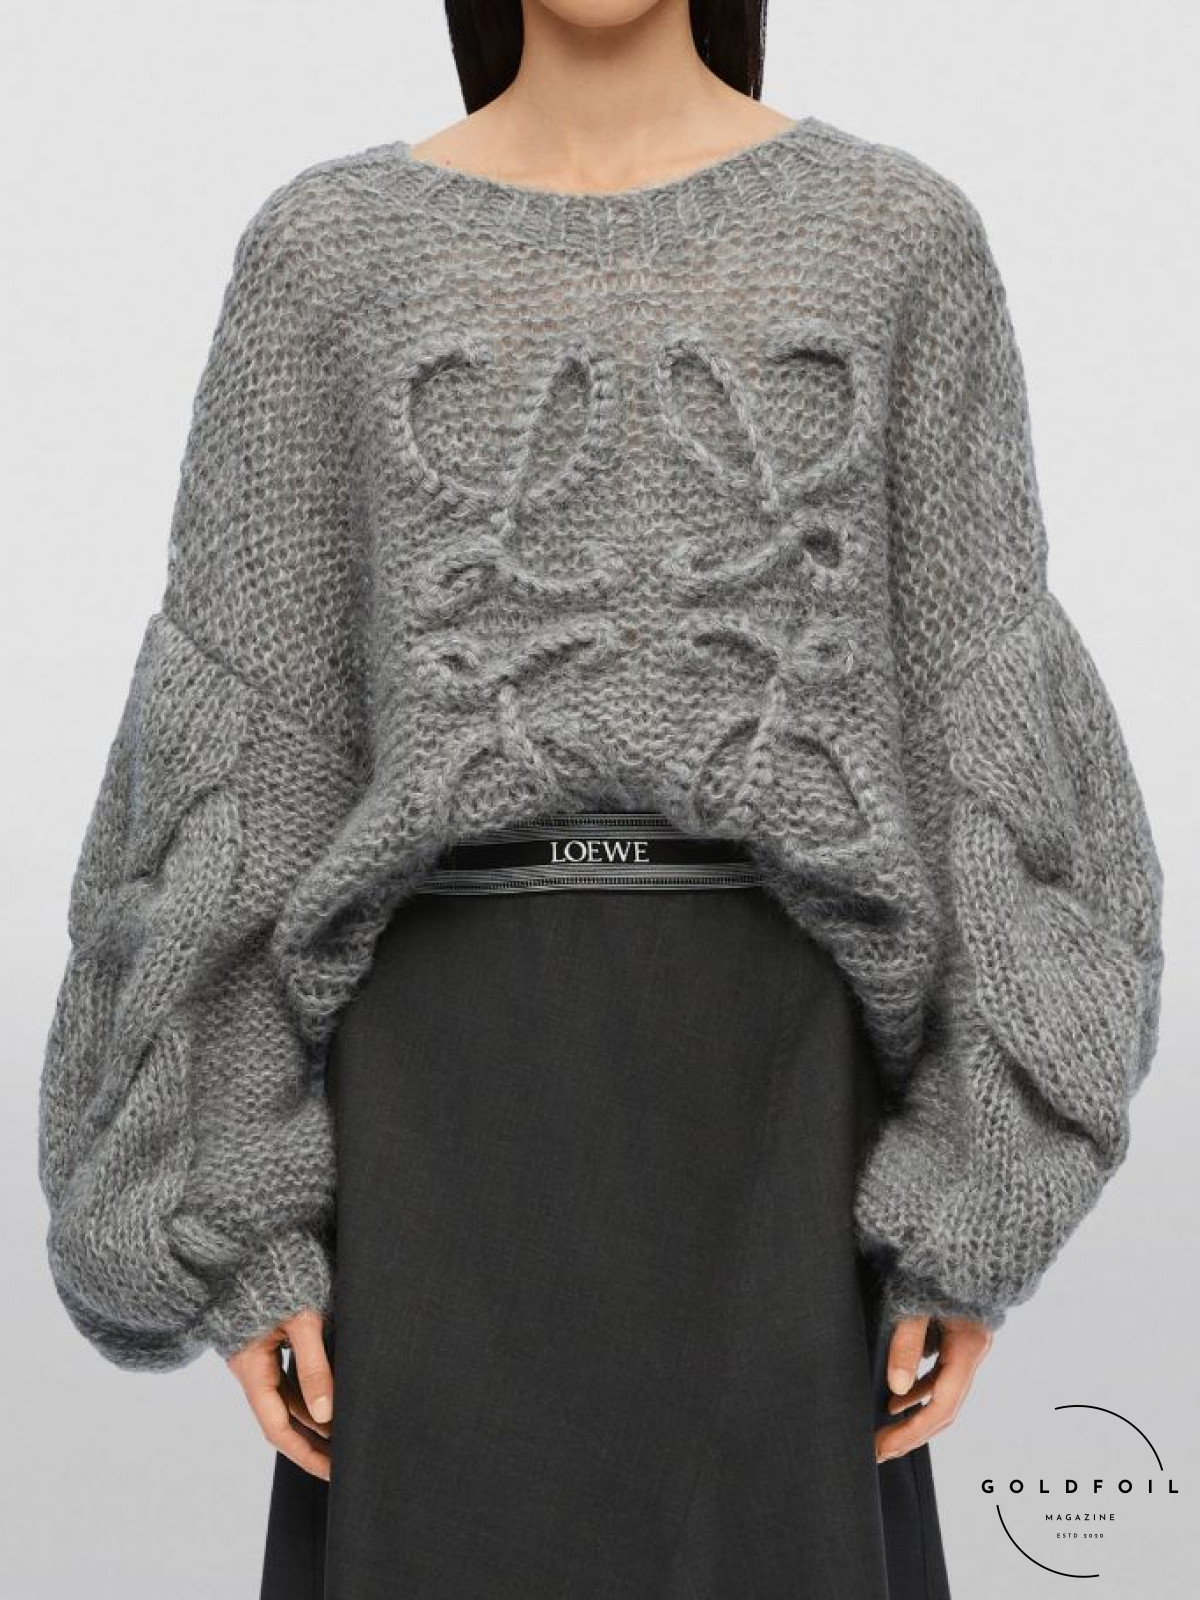 A model wearing a chunky grey knit mohair blend anagram sweater from Loewe